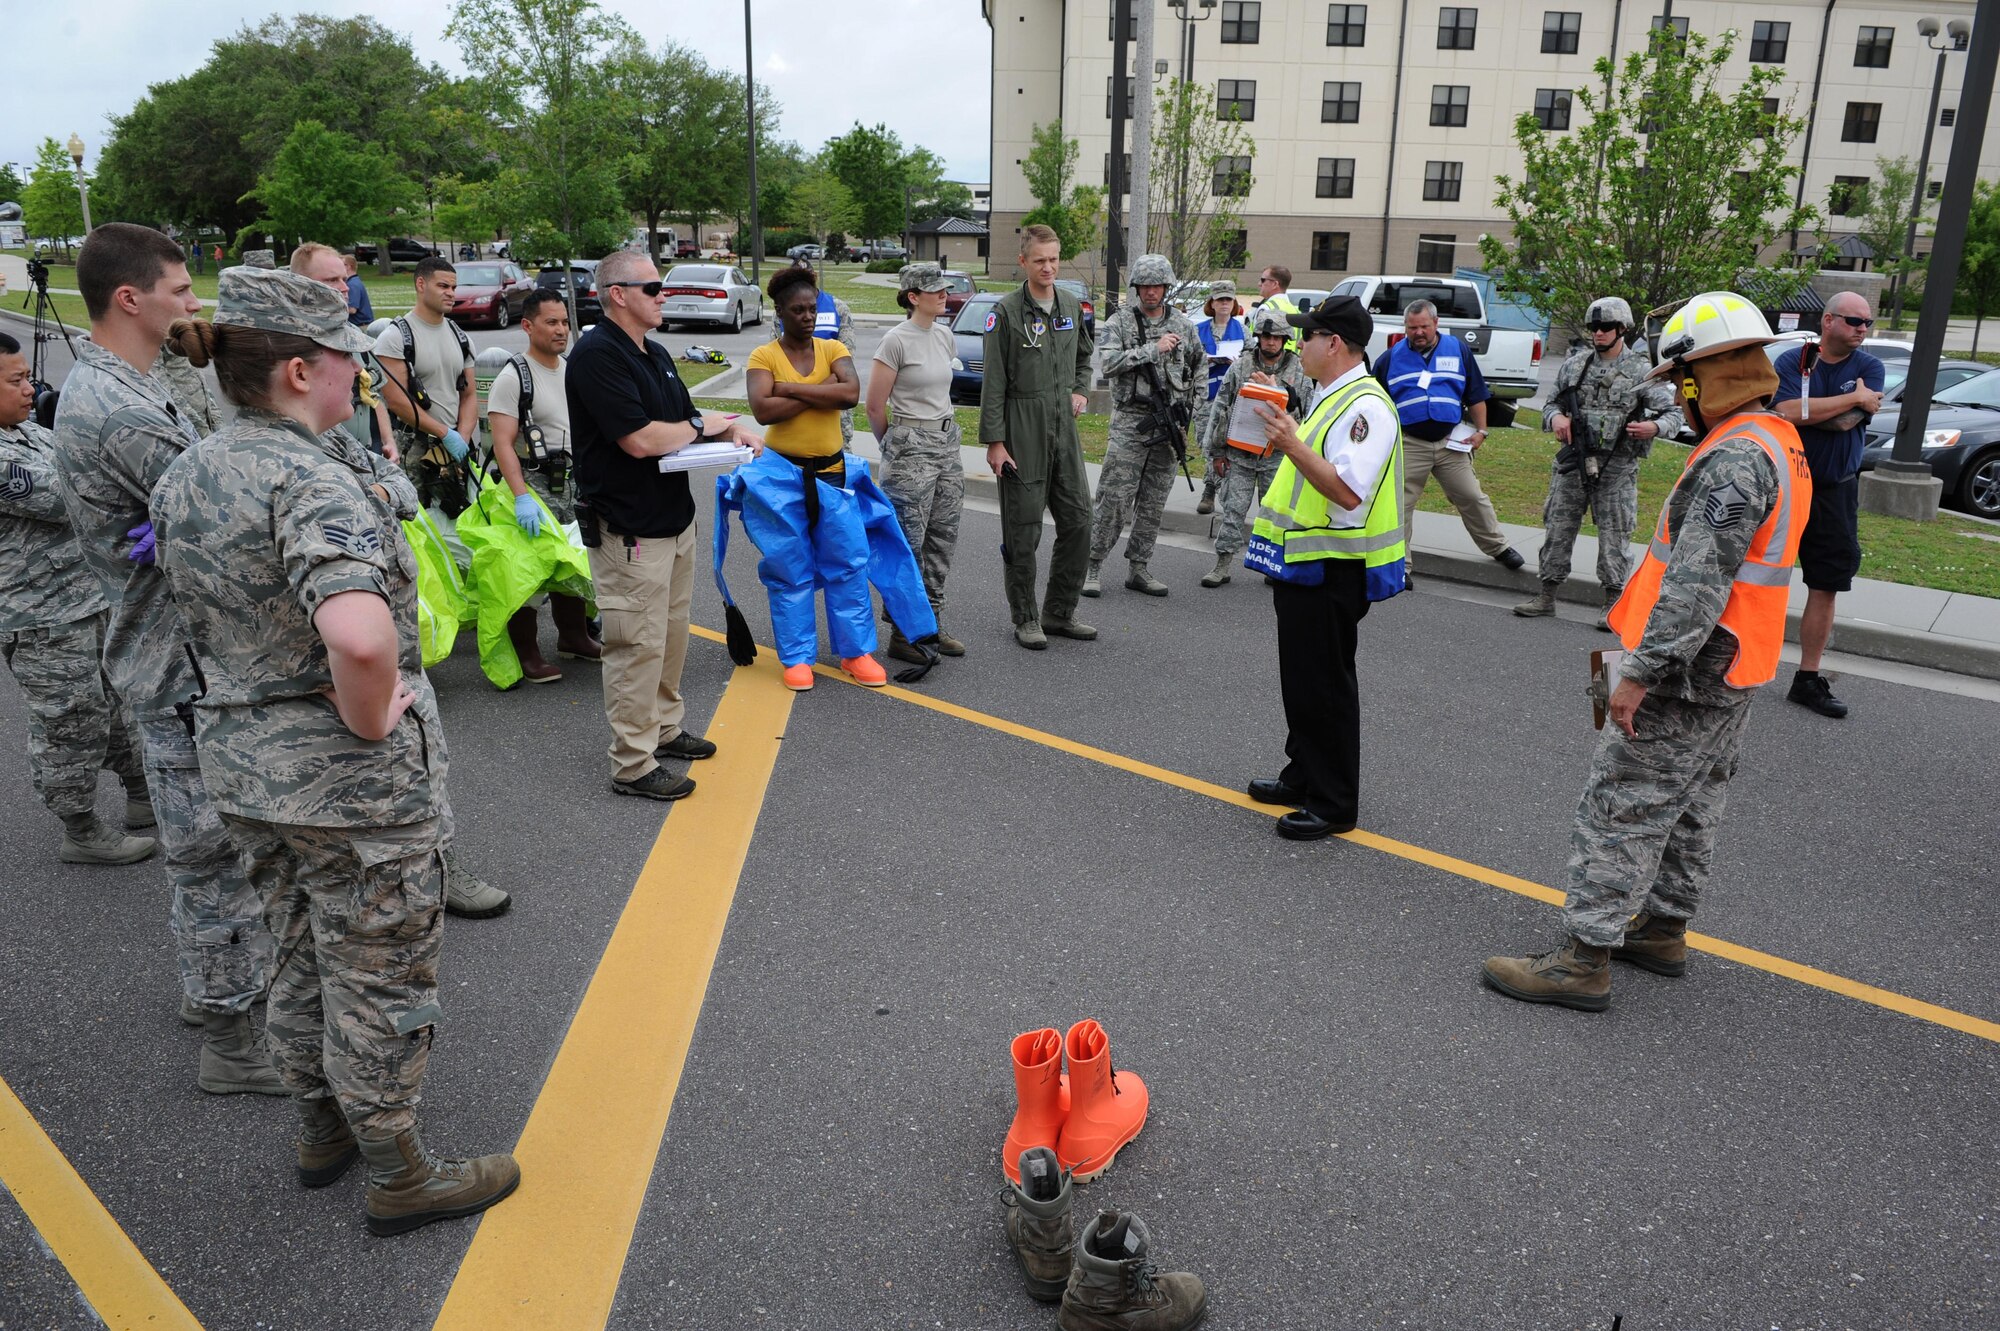 James Donnett, 81st Infrastructure Division fire chief, briefs the incident action plan during a Chemical, Biological, Radiological, Nuclear and Explosive exercise scenario, April 21, 2016, Keesler Air Force Base, Miss. The Force Protection Condition exercise scenario simulated an intruder entering the hazardous waste 90-day accumulation site, where an explosion occurred causing a mass casualty event. The exercise tested the base’s capability to react to and recover from a mass casualty event. (U.S. Air Force photo by Kemberly Groue)